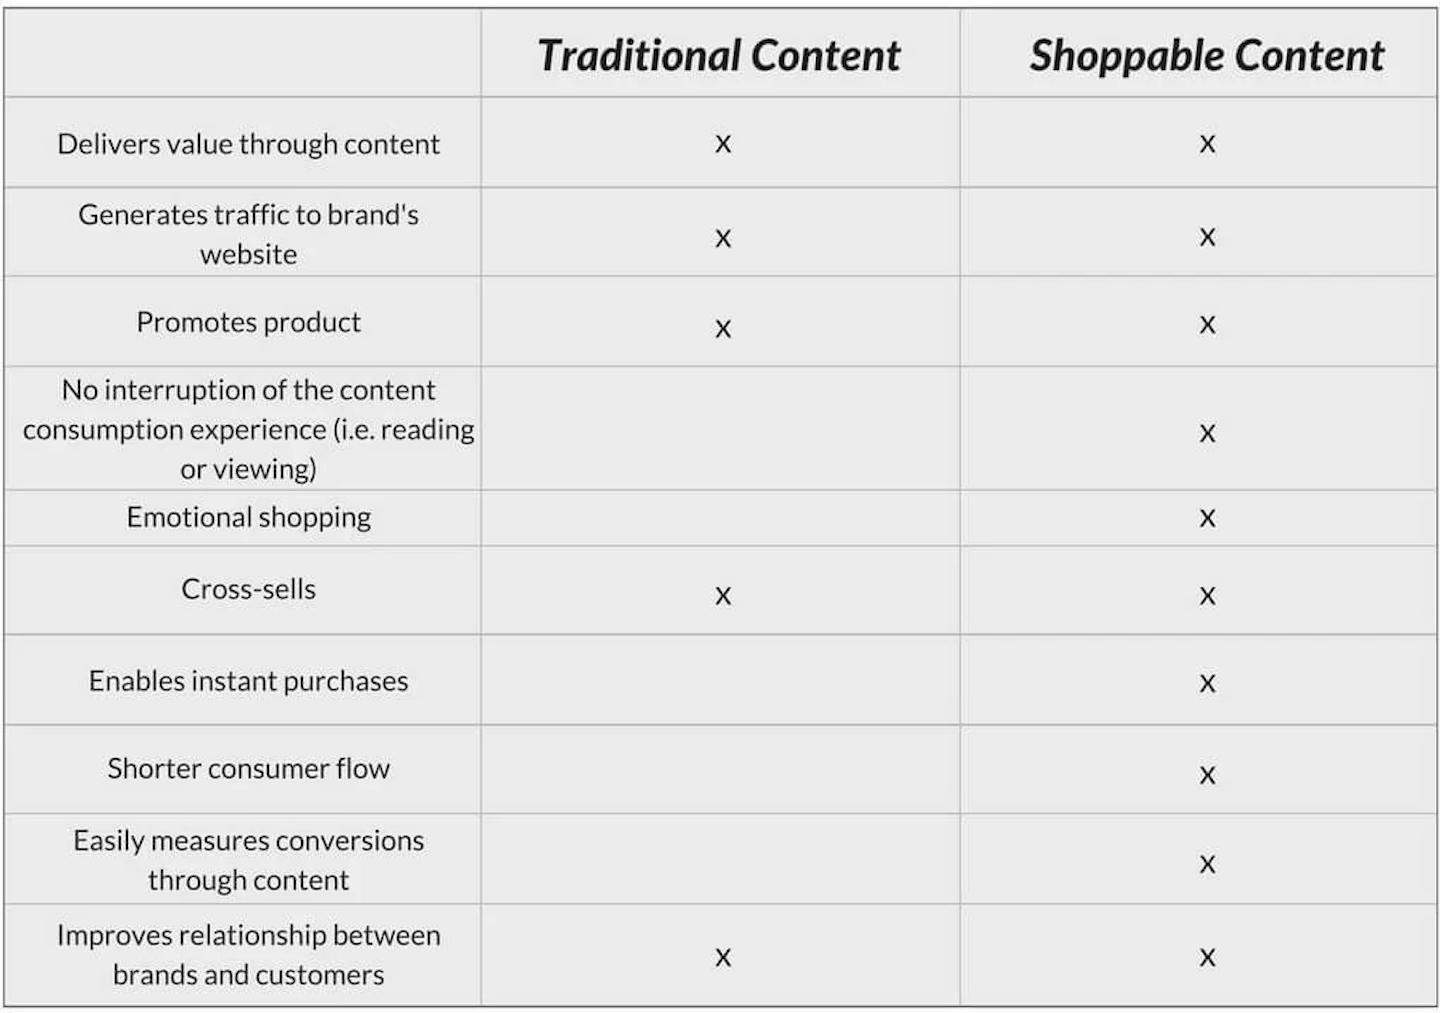 Comparison of traditional and shoppable content